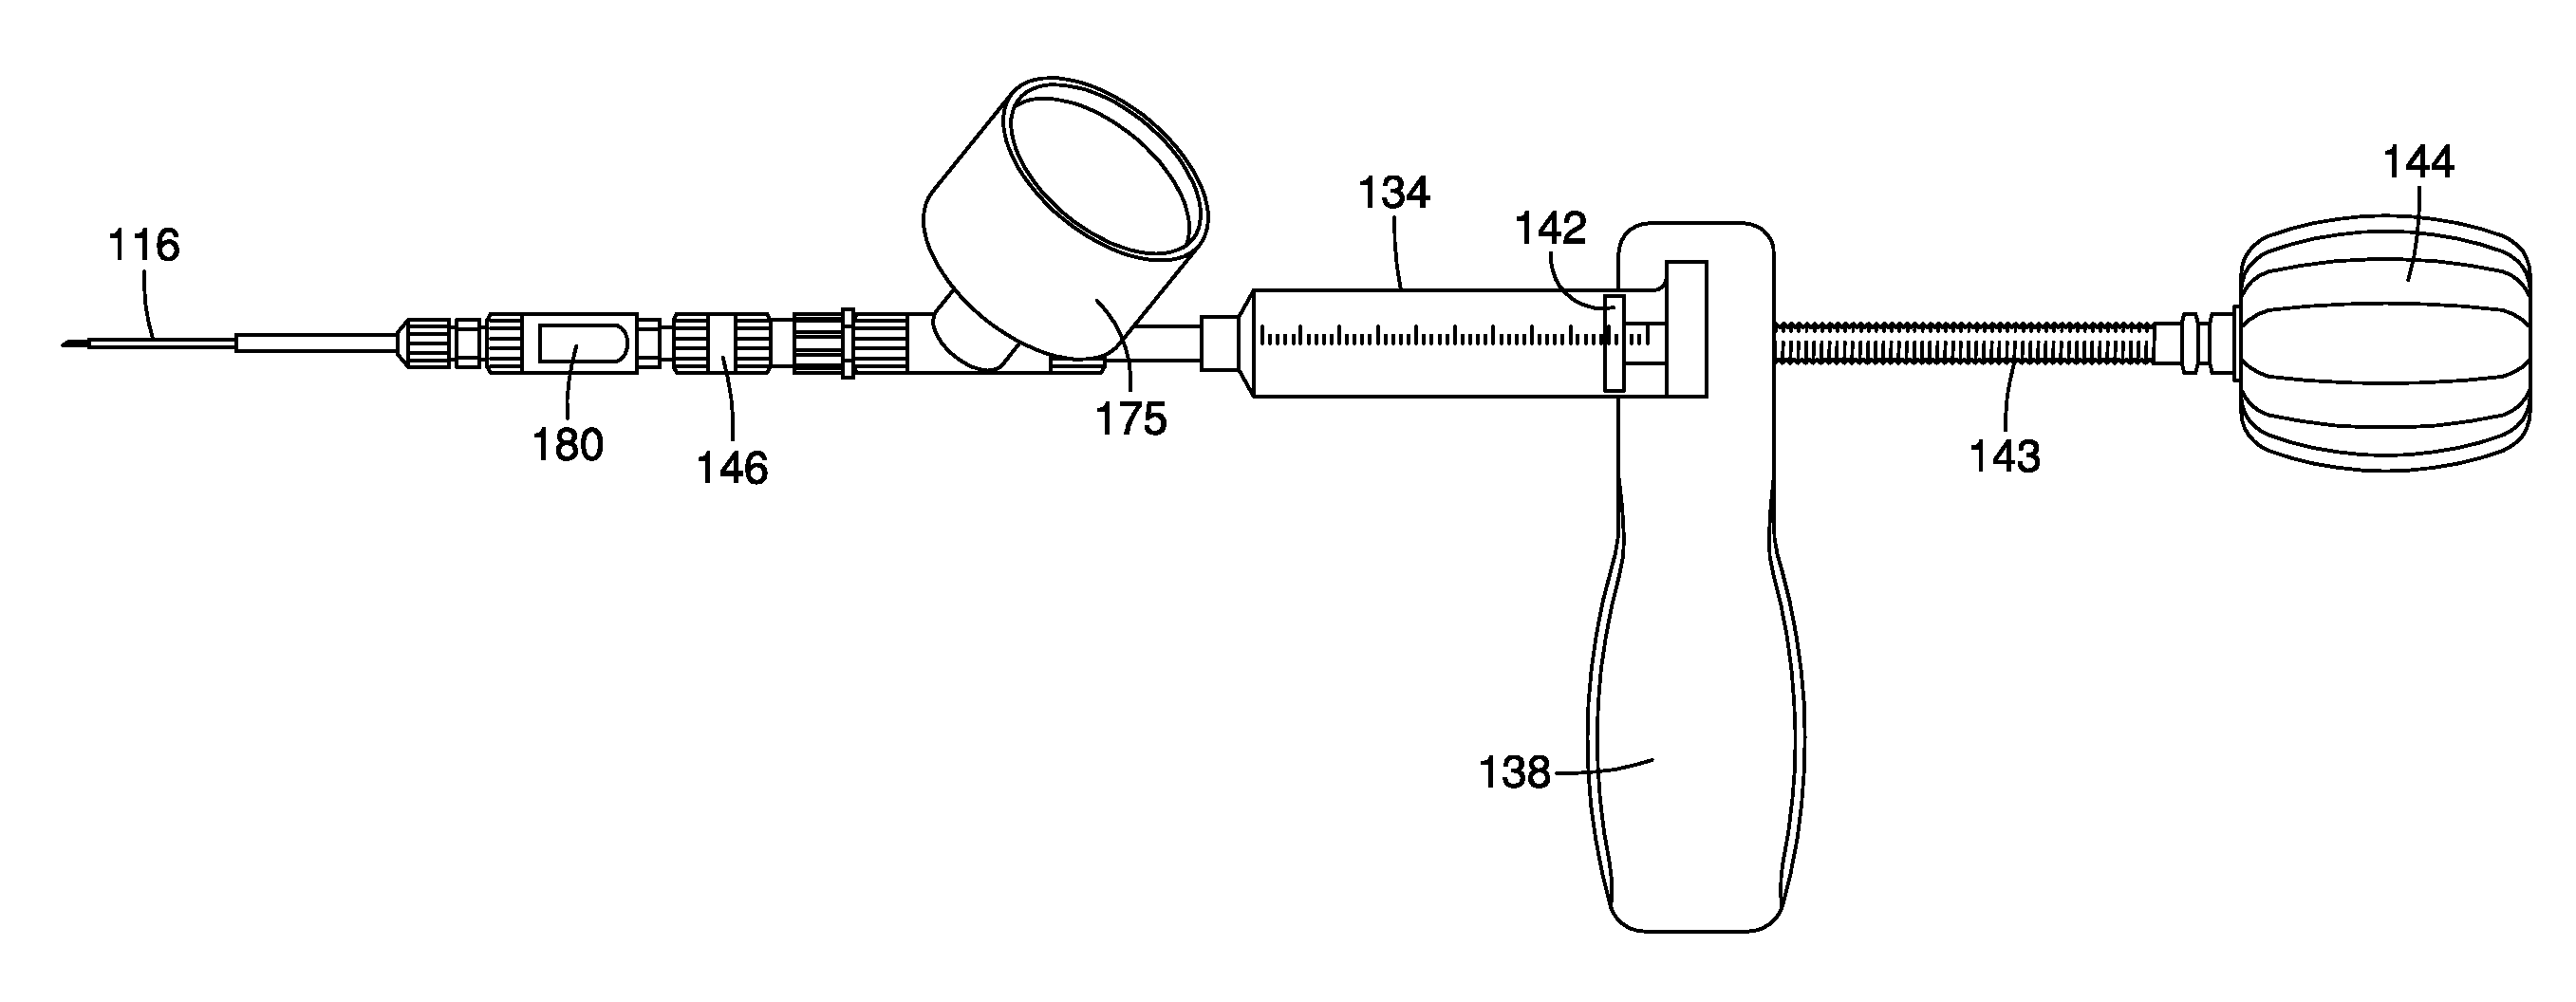 Apparatus and Method for Endoscopic Submucosal Dissection